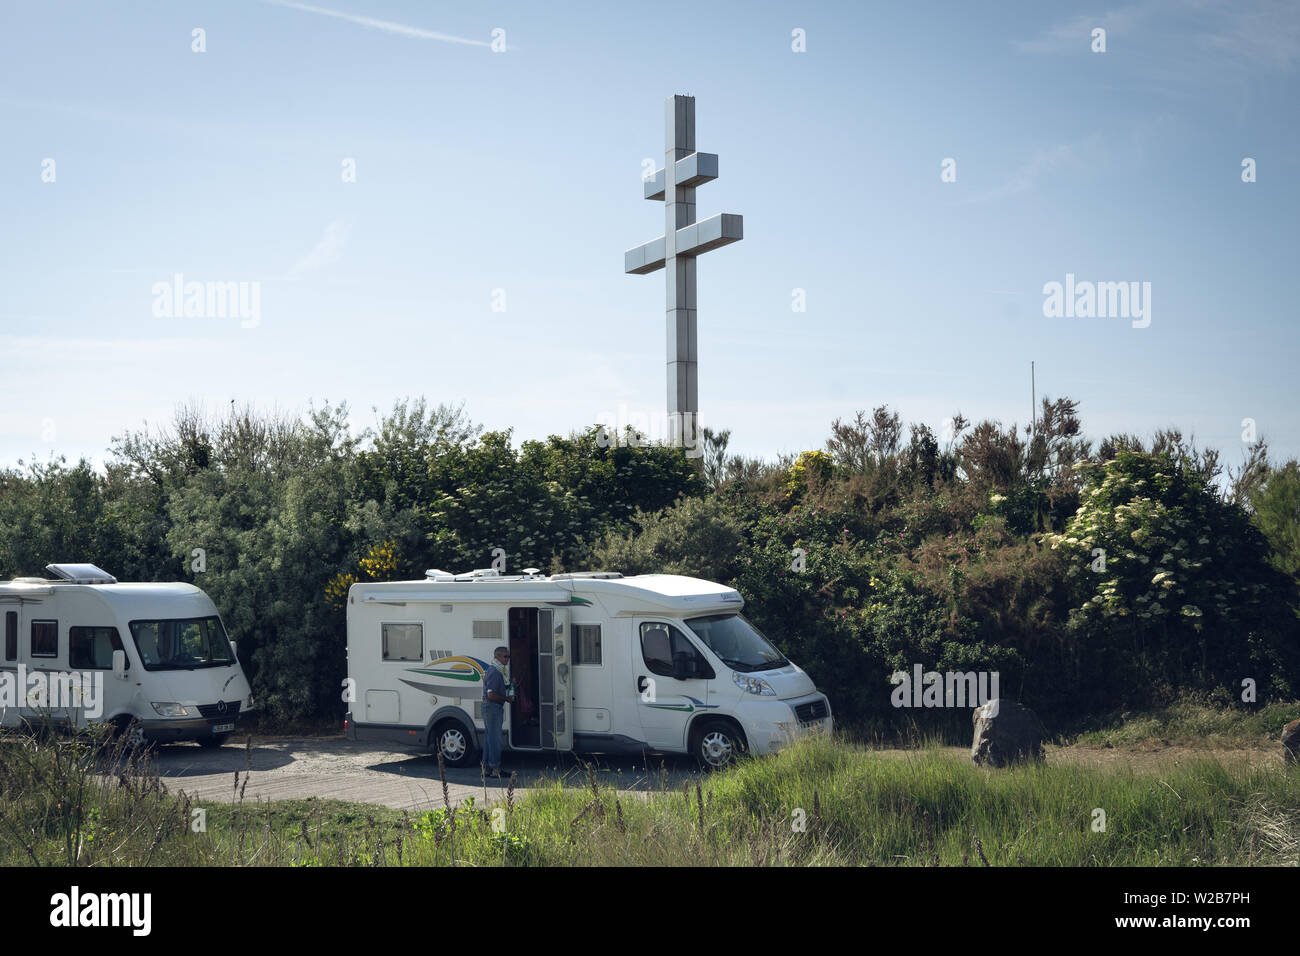 Two RVs (recreational vehicles) parked right behind the Cross of Lorraine, in Graye-Sur-Mer  a man climbing into one the RV can be seen Stock Photo